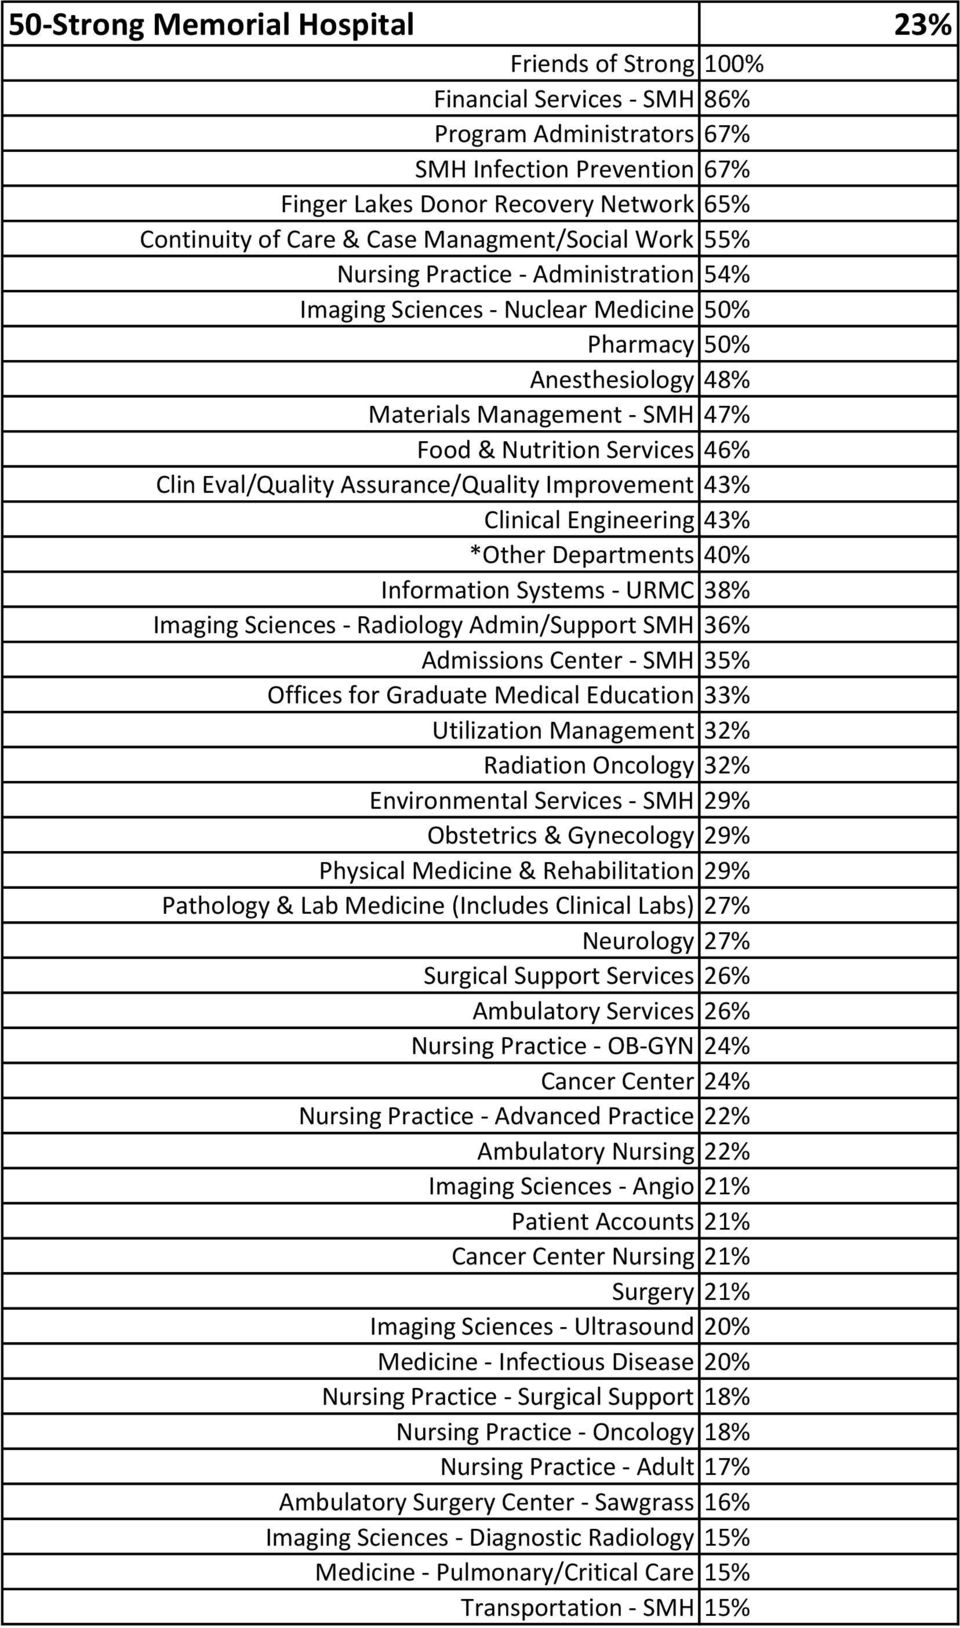 46% Clin Eval/Quality Assurance/Quality Improvement 43% Clinical Engineering 43% *Other Departments 40% Information Systems - URMC 38% Imaging Sciences - Radiology Admin/Support SMH 36% Admissions